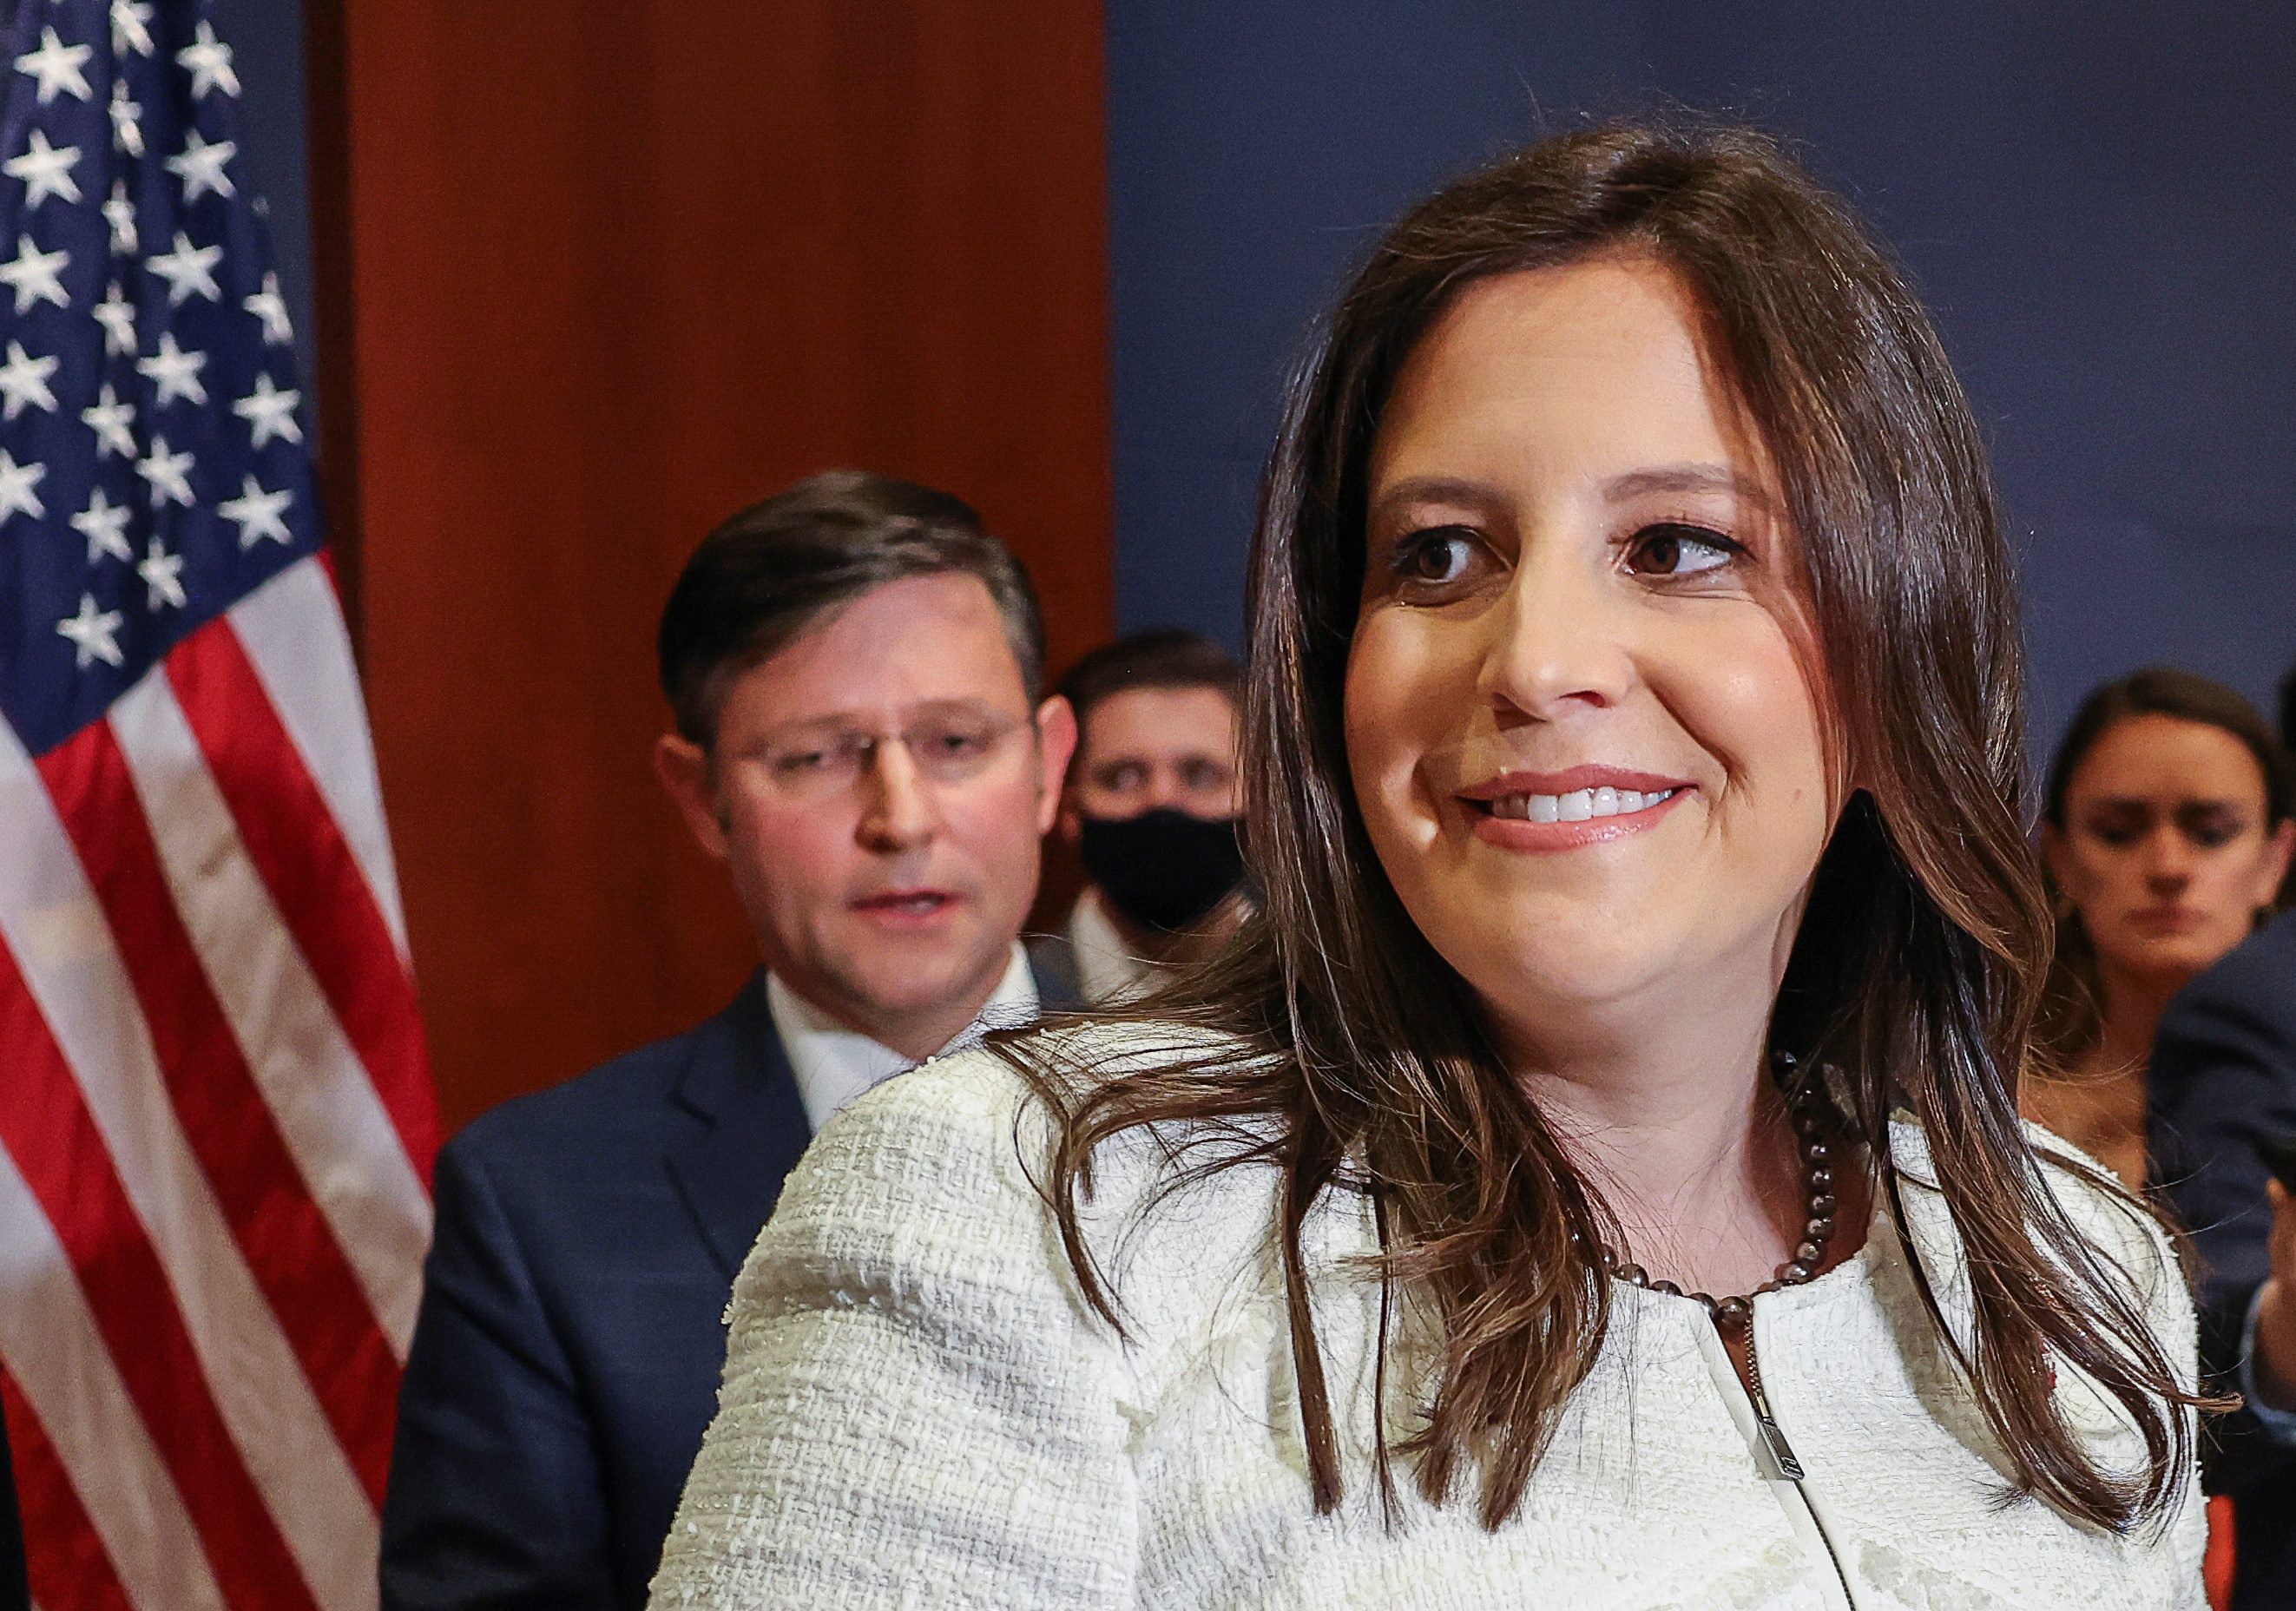 Trump-backed Stefanik wins vote to join House Republican leadership